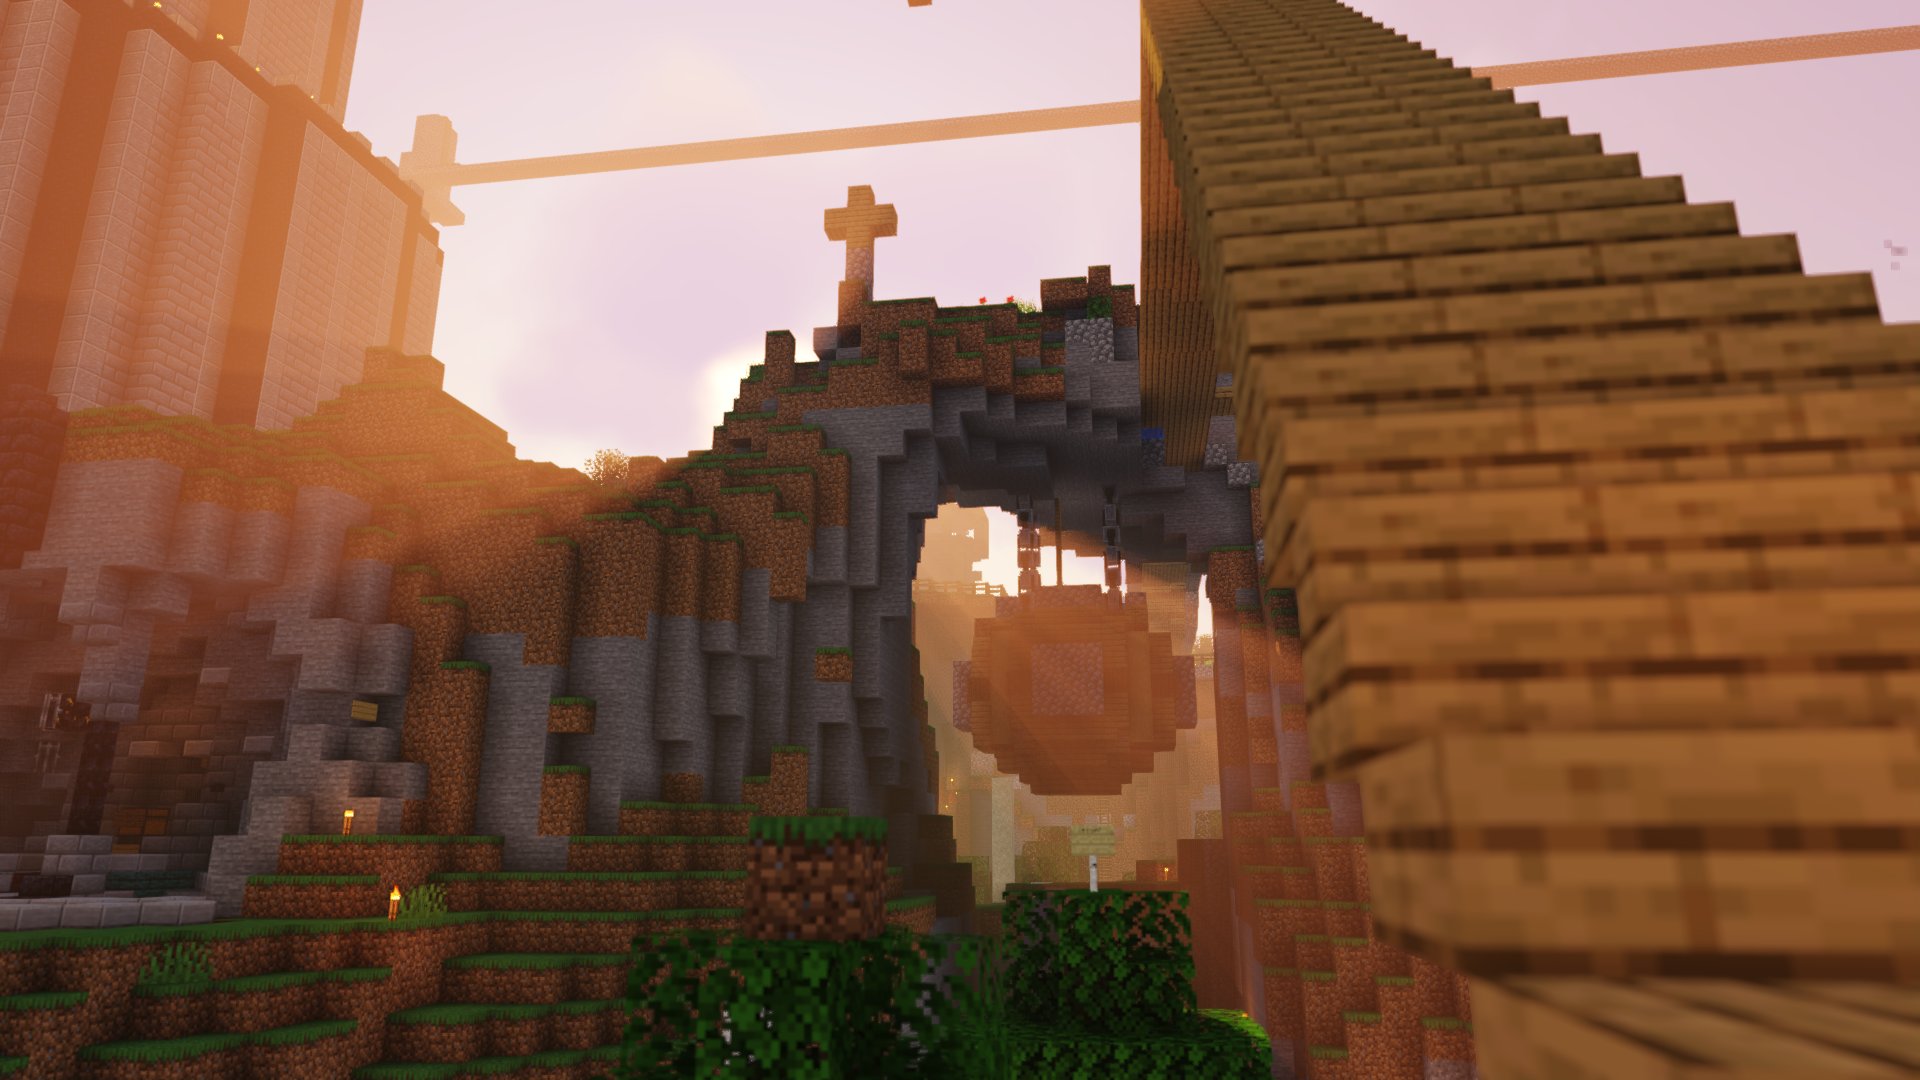 General 1920x1080 Minecraft shaders hanging house dream smp PC gaming video games screen shot